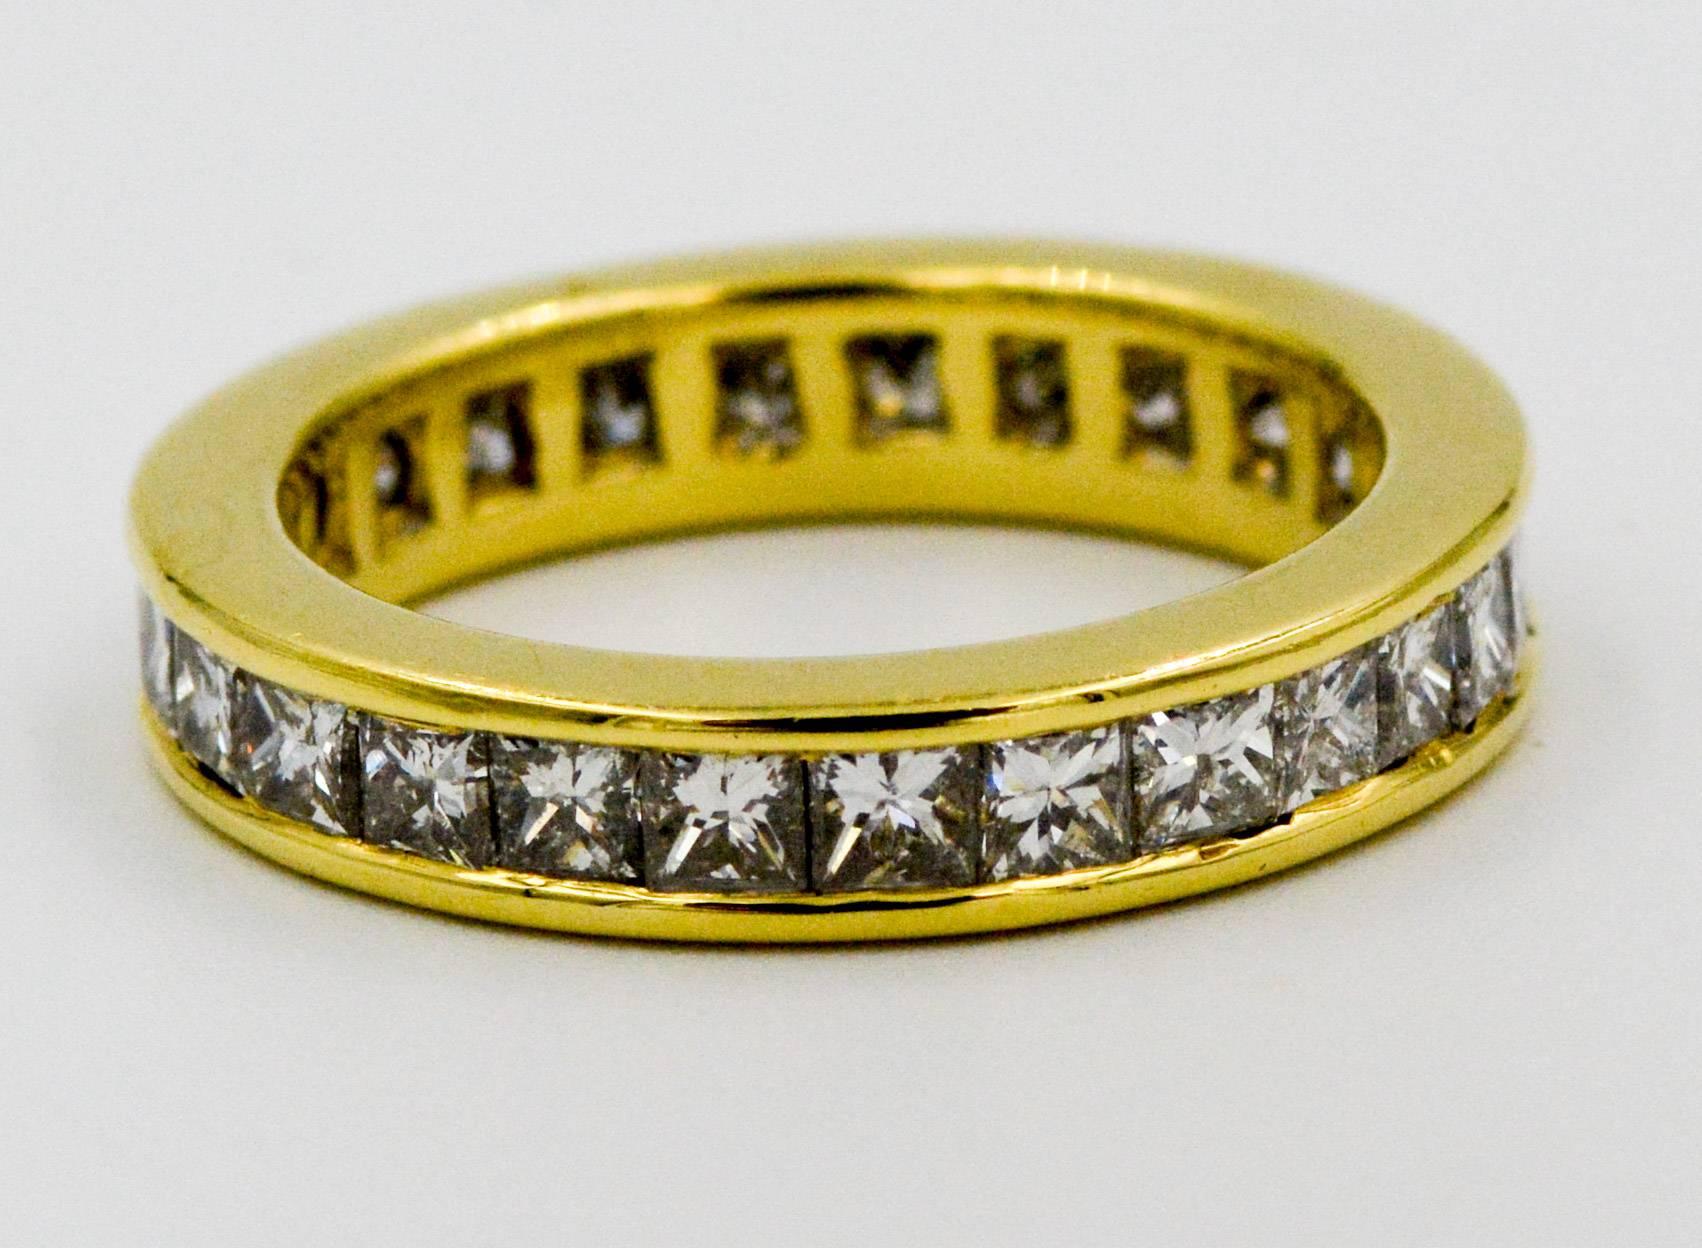 Princess cut diamonds sparkle in this eternity band ring crafted in 18 karat yellow gold. This eternity band features 2.00 carats of dazzling channel set princess cut diamonds, H color and SI1 clarity. Ring is a size 5.5. 